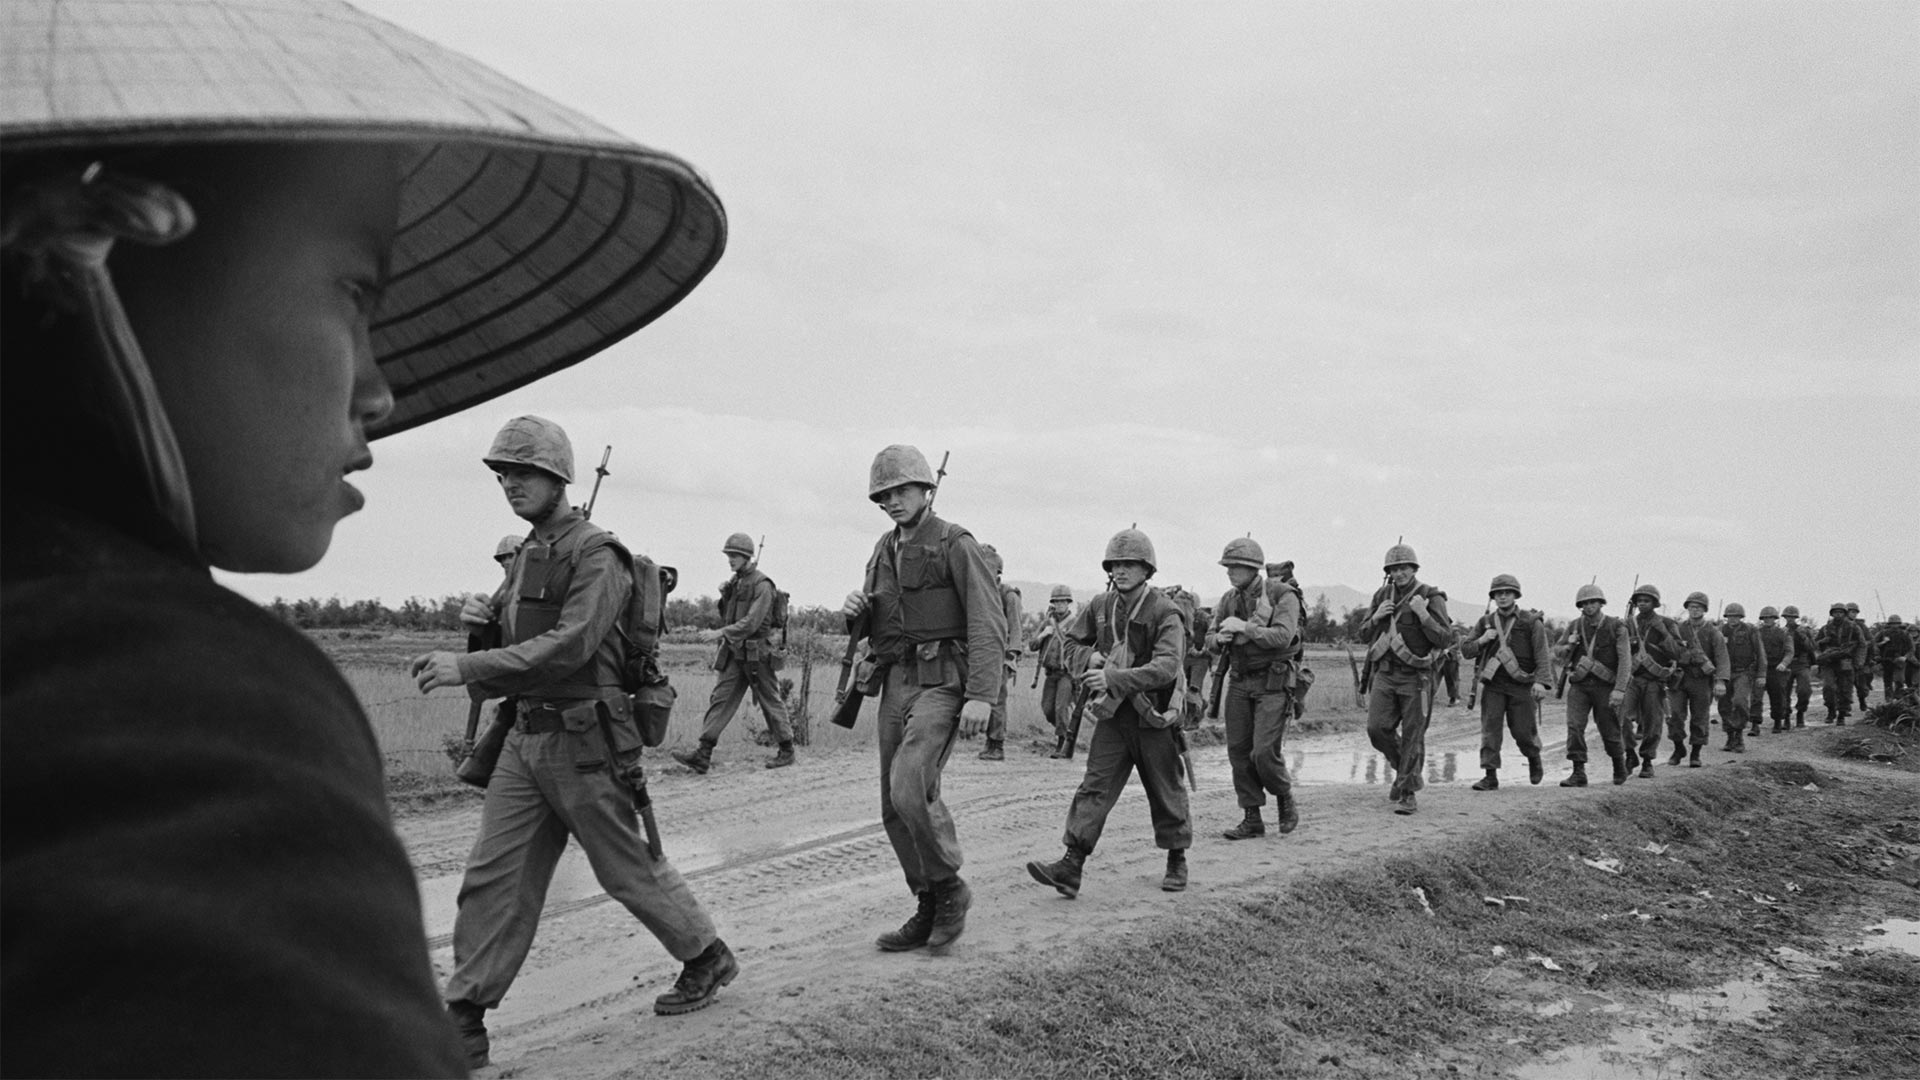 Marines marching in Danang. March 15, 1965.